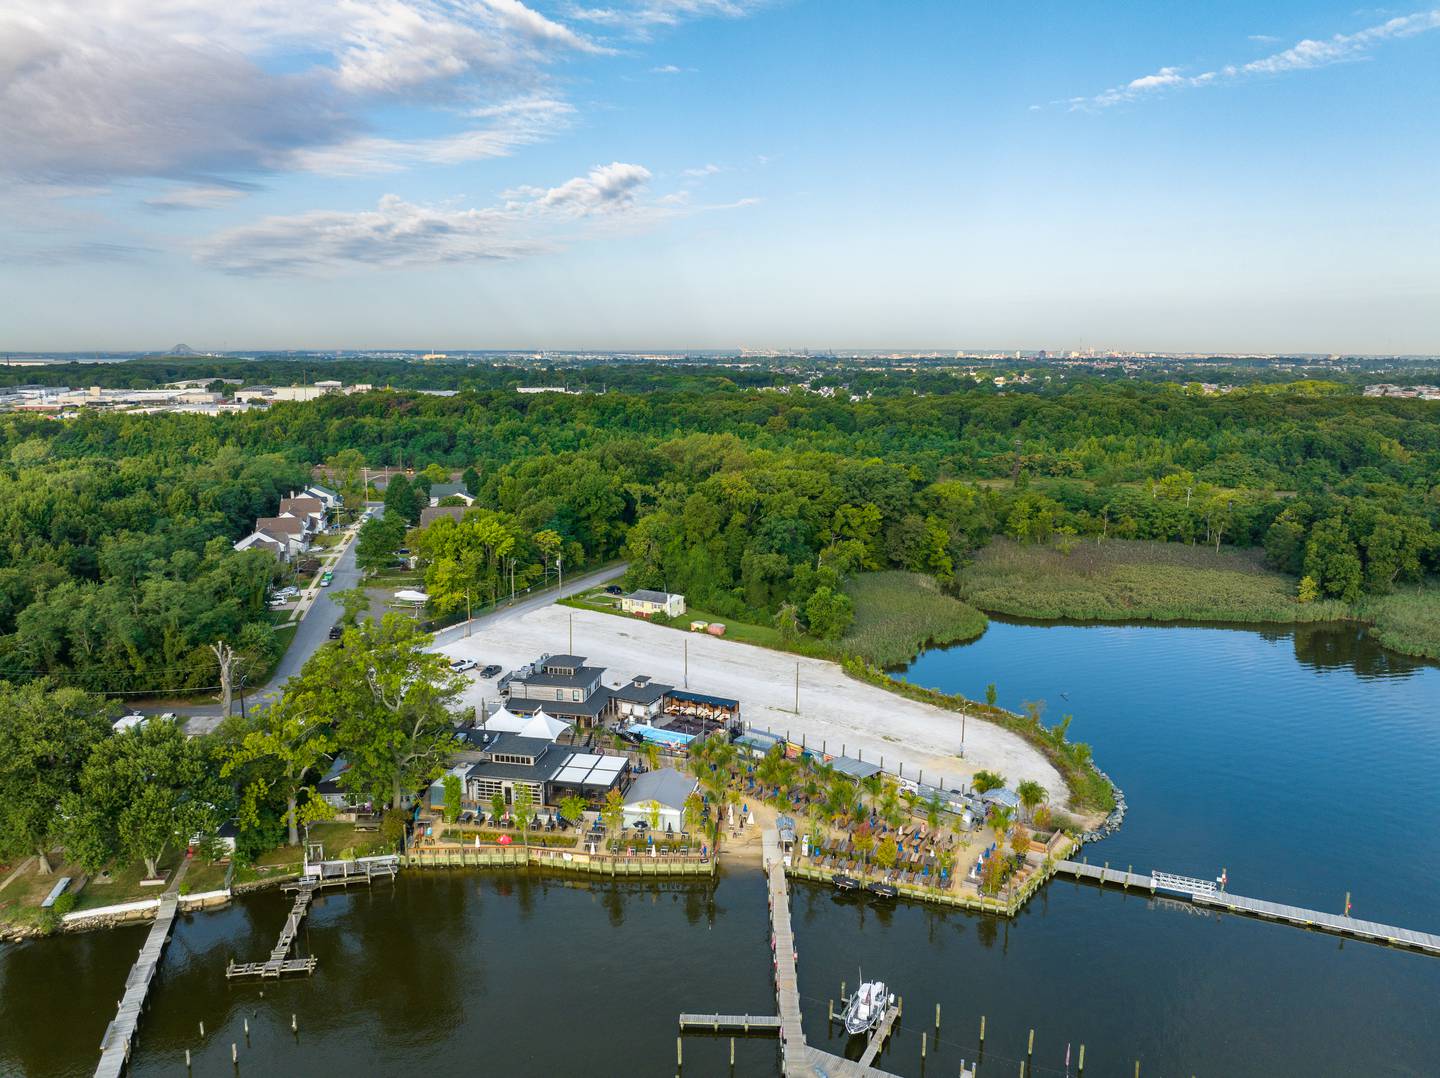 An aerial image shows Tiki Lee's, a bar and restaurant situated on the Back River in Sparrows Point, Maryland.